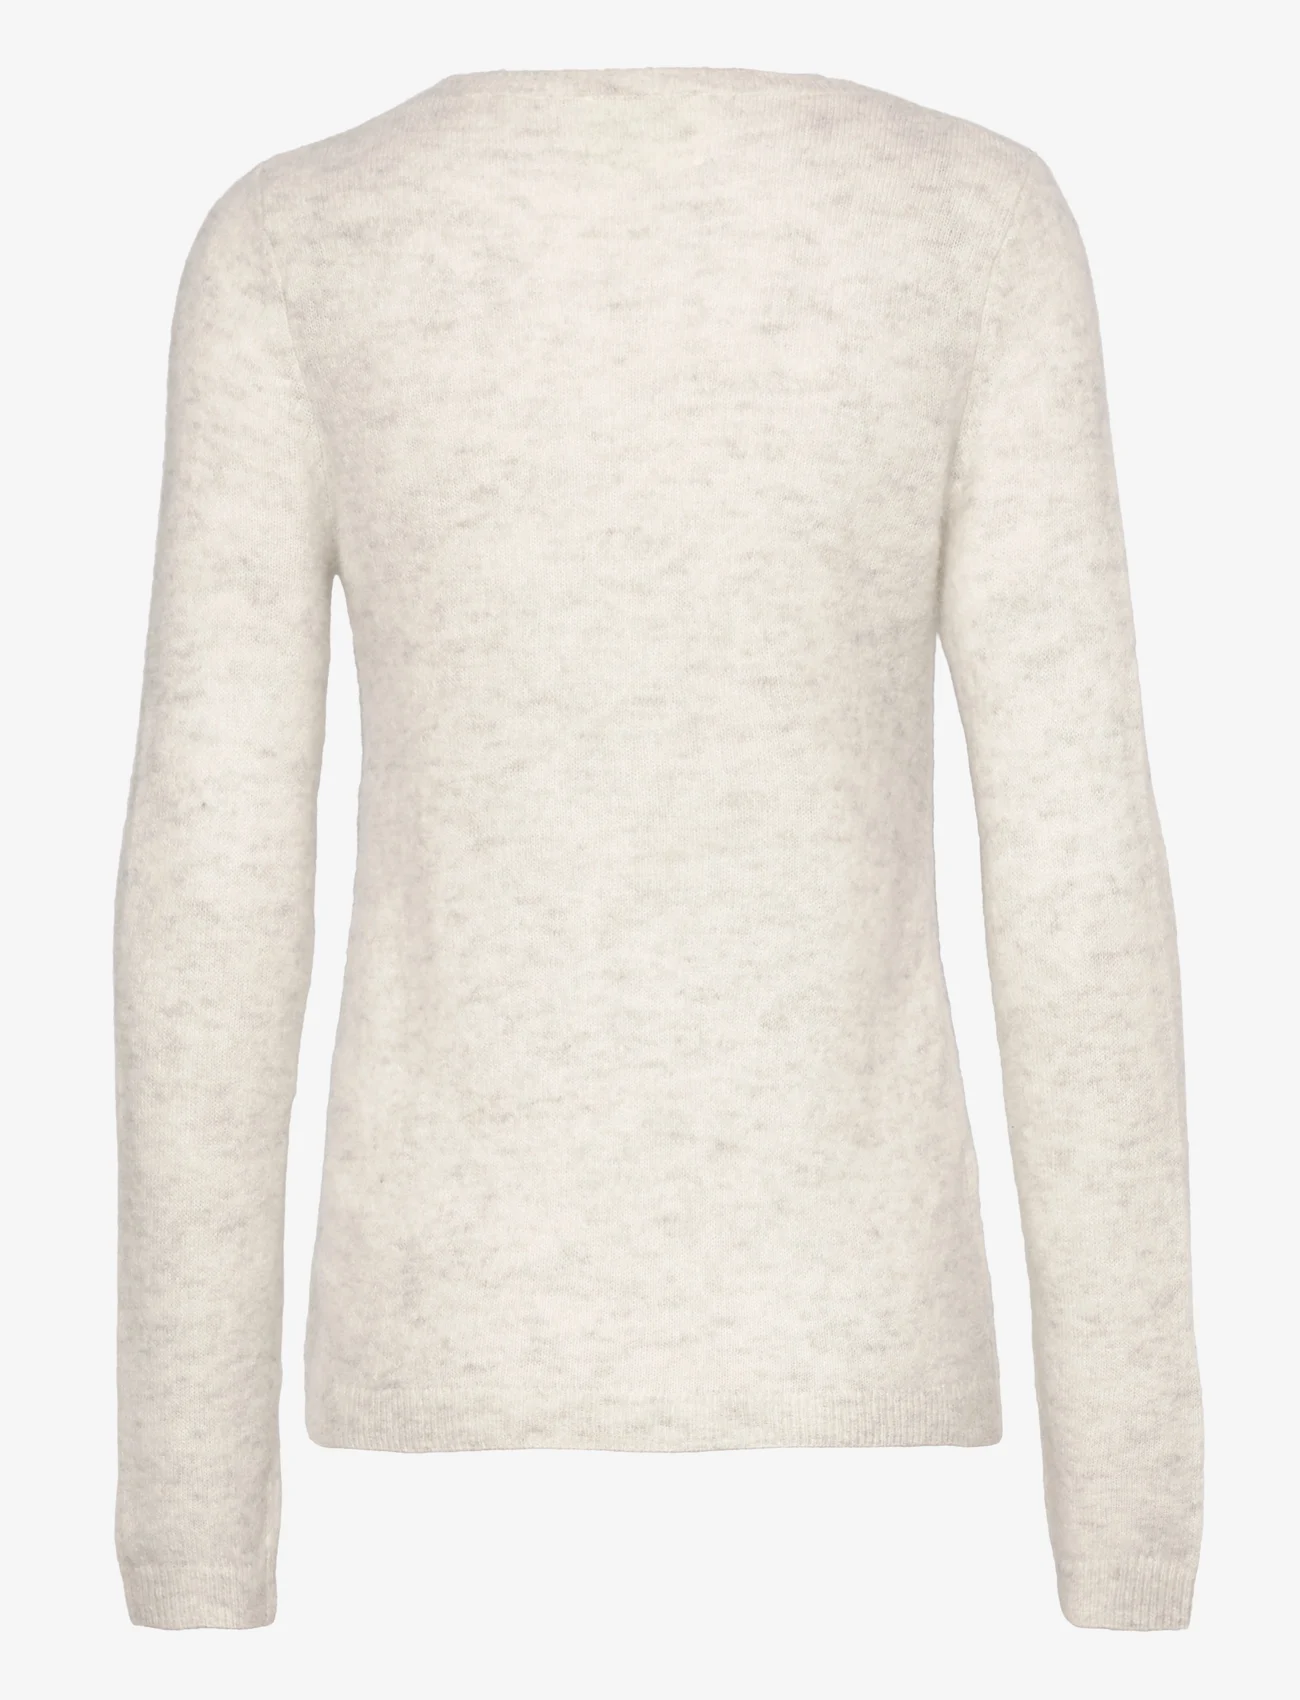 Sofie Schnoor - Knit - swetry - off white - 1